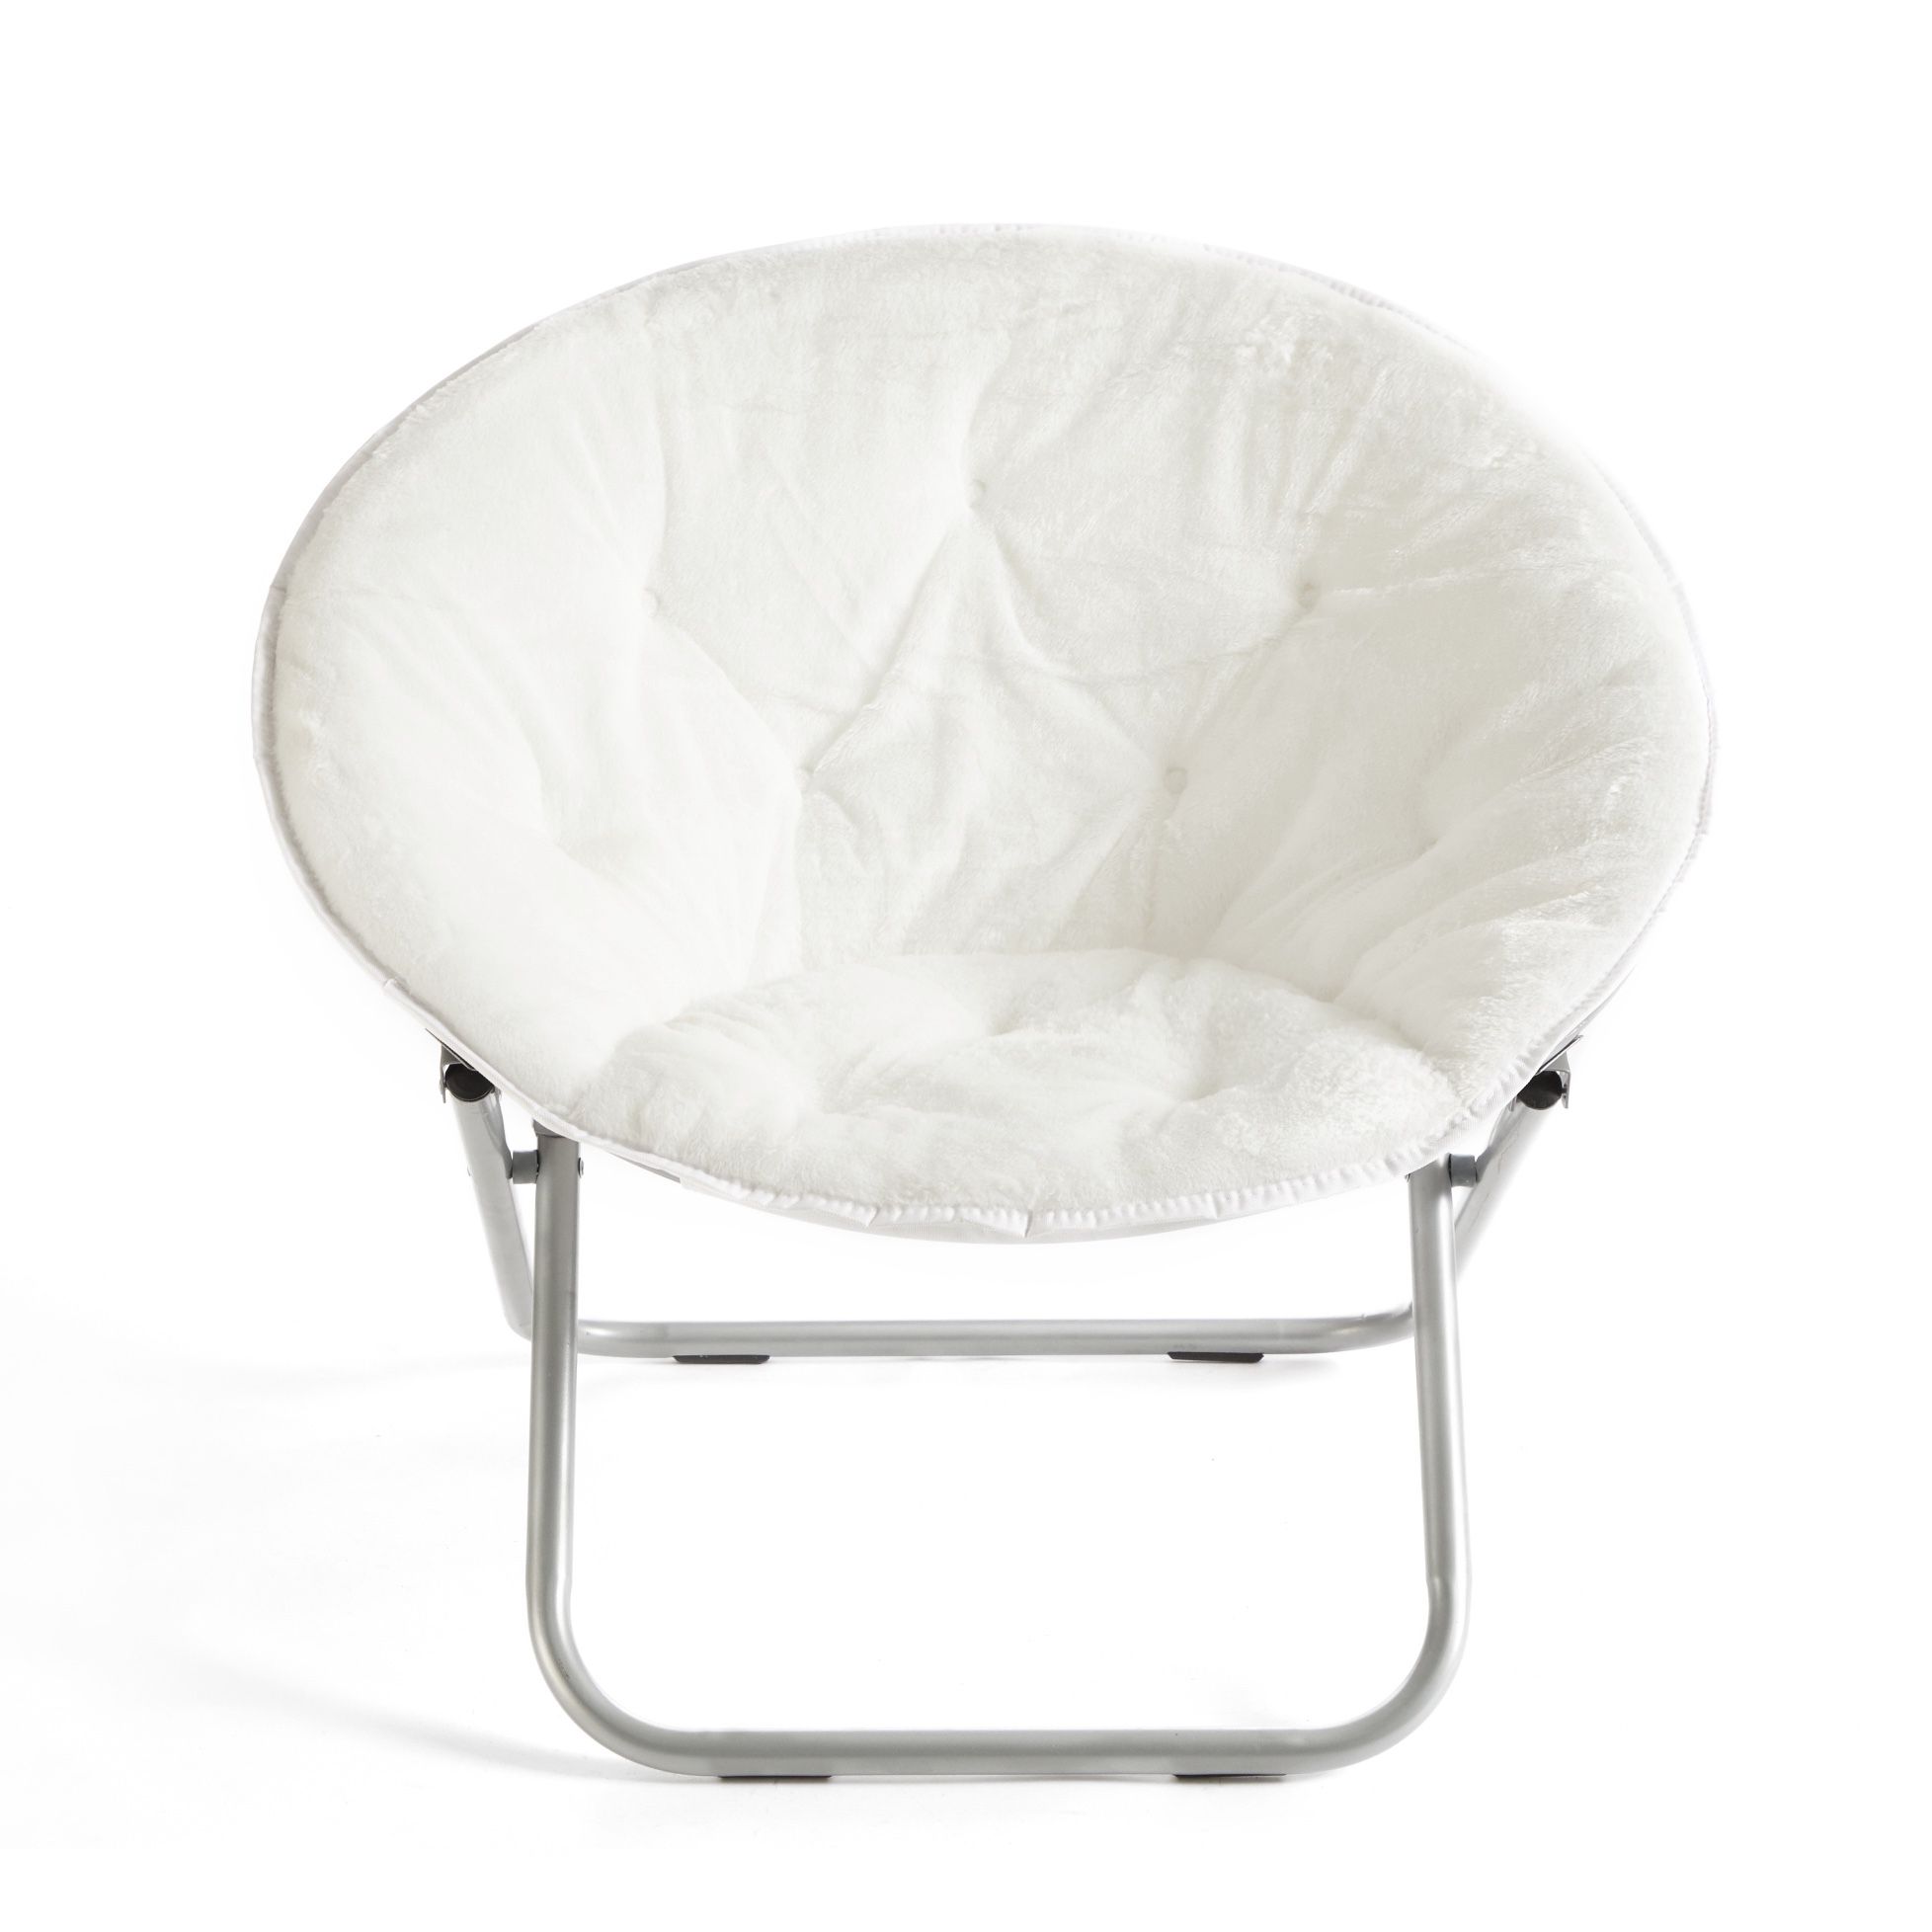 Mainstays Large Super Soft Microsuede 30" Saucer Chair, White